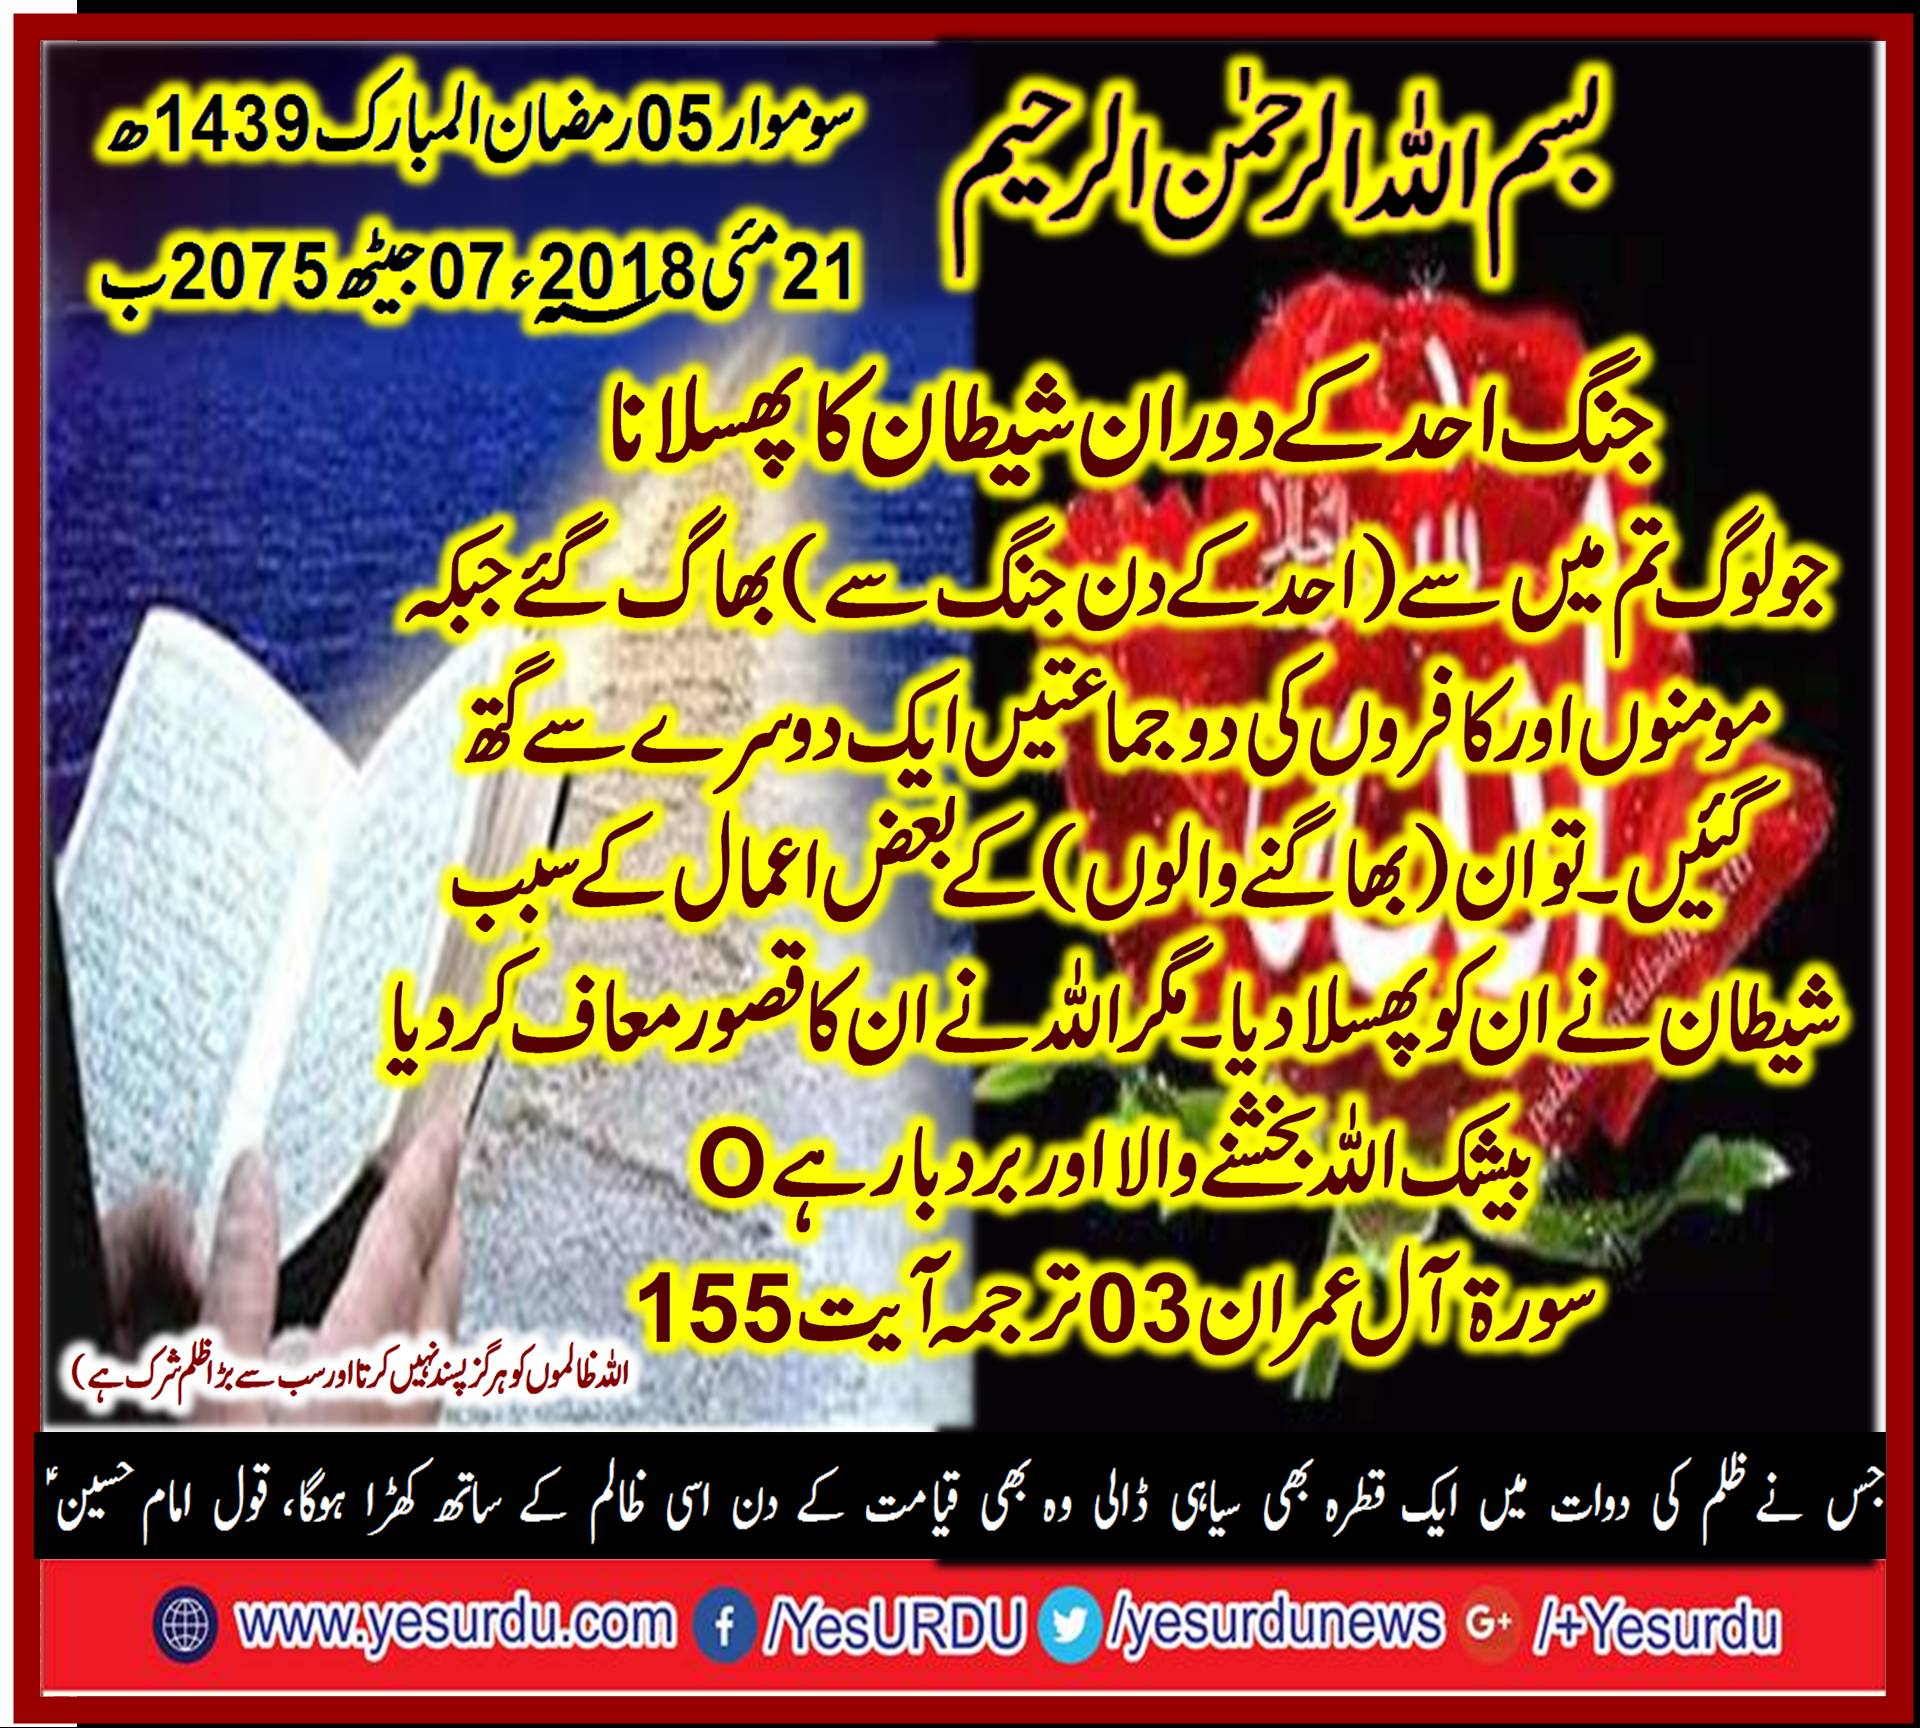 Ayat, e Kareema, Surah, Tehreem, Maryam bint e Imran، Surah Yunas, Allah, ka Fazal, Surah Mulk, 67, Ayat, No. 3, to, 4, Allah's, creature, Surah, Aal e Imran, Ayat, No, 103, Allah, gives, love, to, hearts, Surah Aal e Imran, Ayat, No 154, Allah's, will, and, your, end, of, time, takes, you, to, the, place, of, your, end, Ayat, No 155, in, the, War of Ohad, Shatan, disappointed, companions, of, Hazrat, Muhammad, S.A.W.W